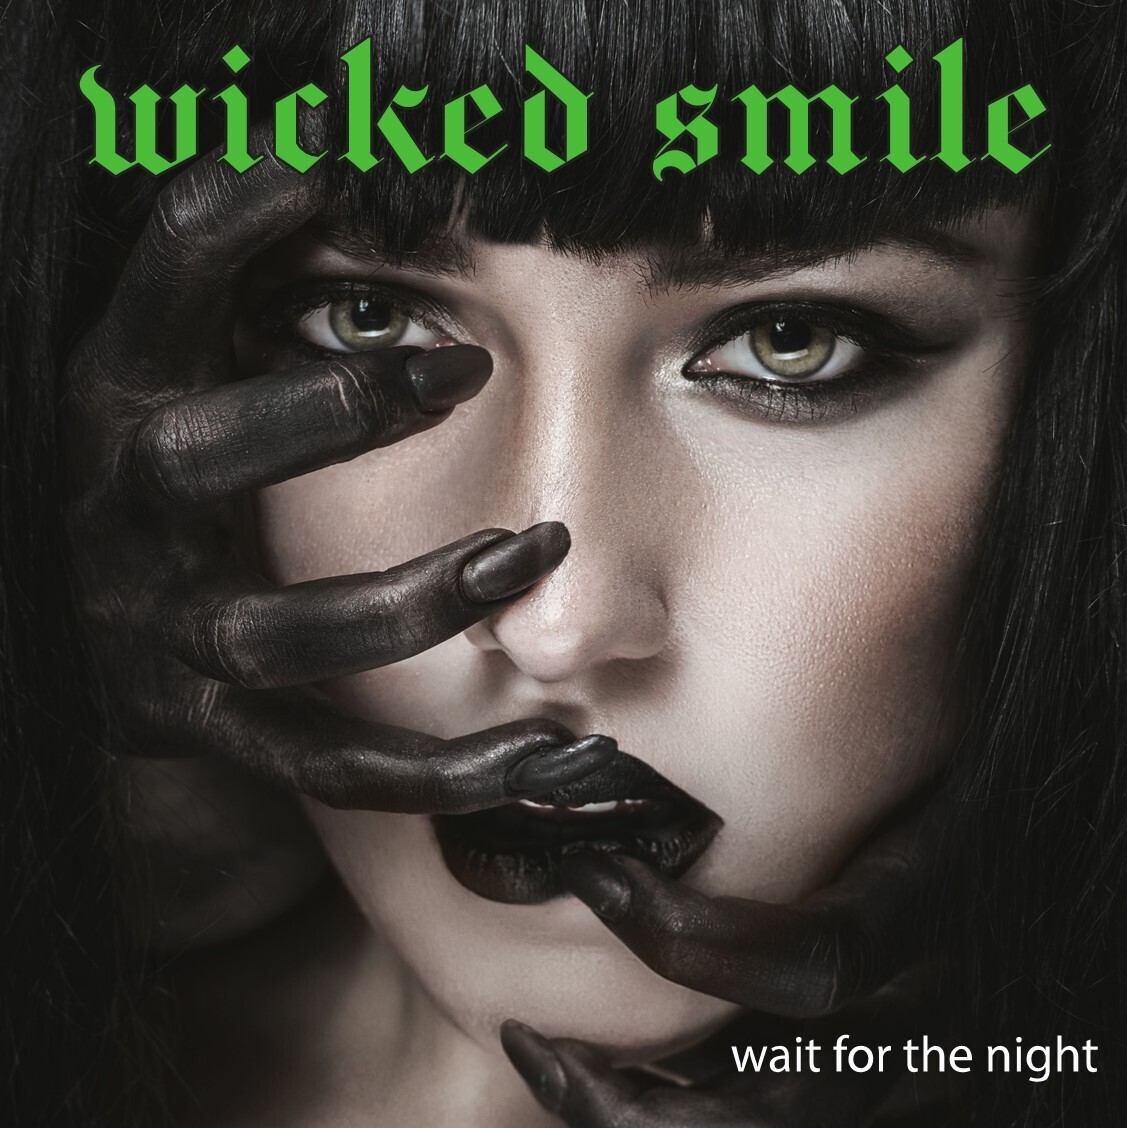 Wicked Smile - Wait For The Night cd (AUSTRALIAN ORDERS ONLY)